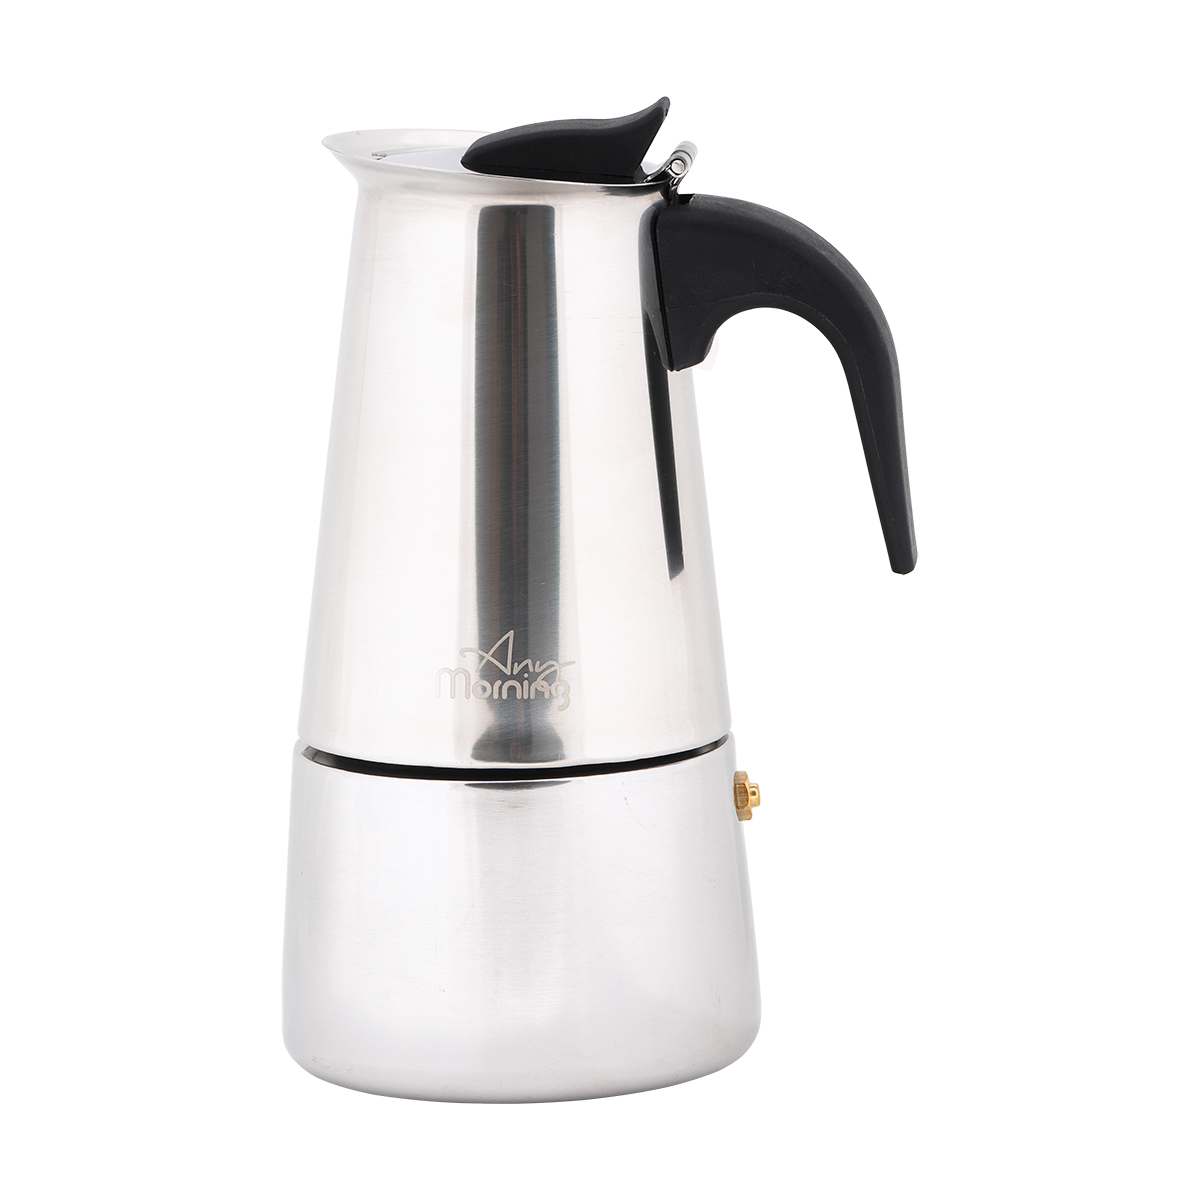 Stainless steel stove top espresso maker 200ml